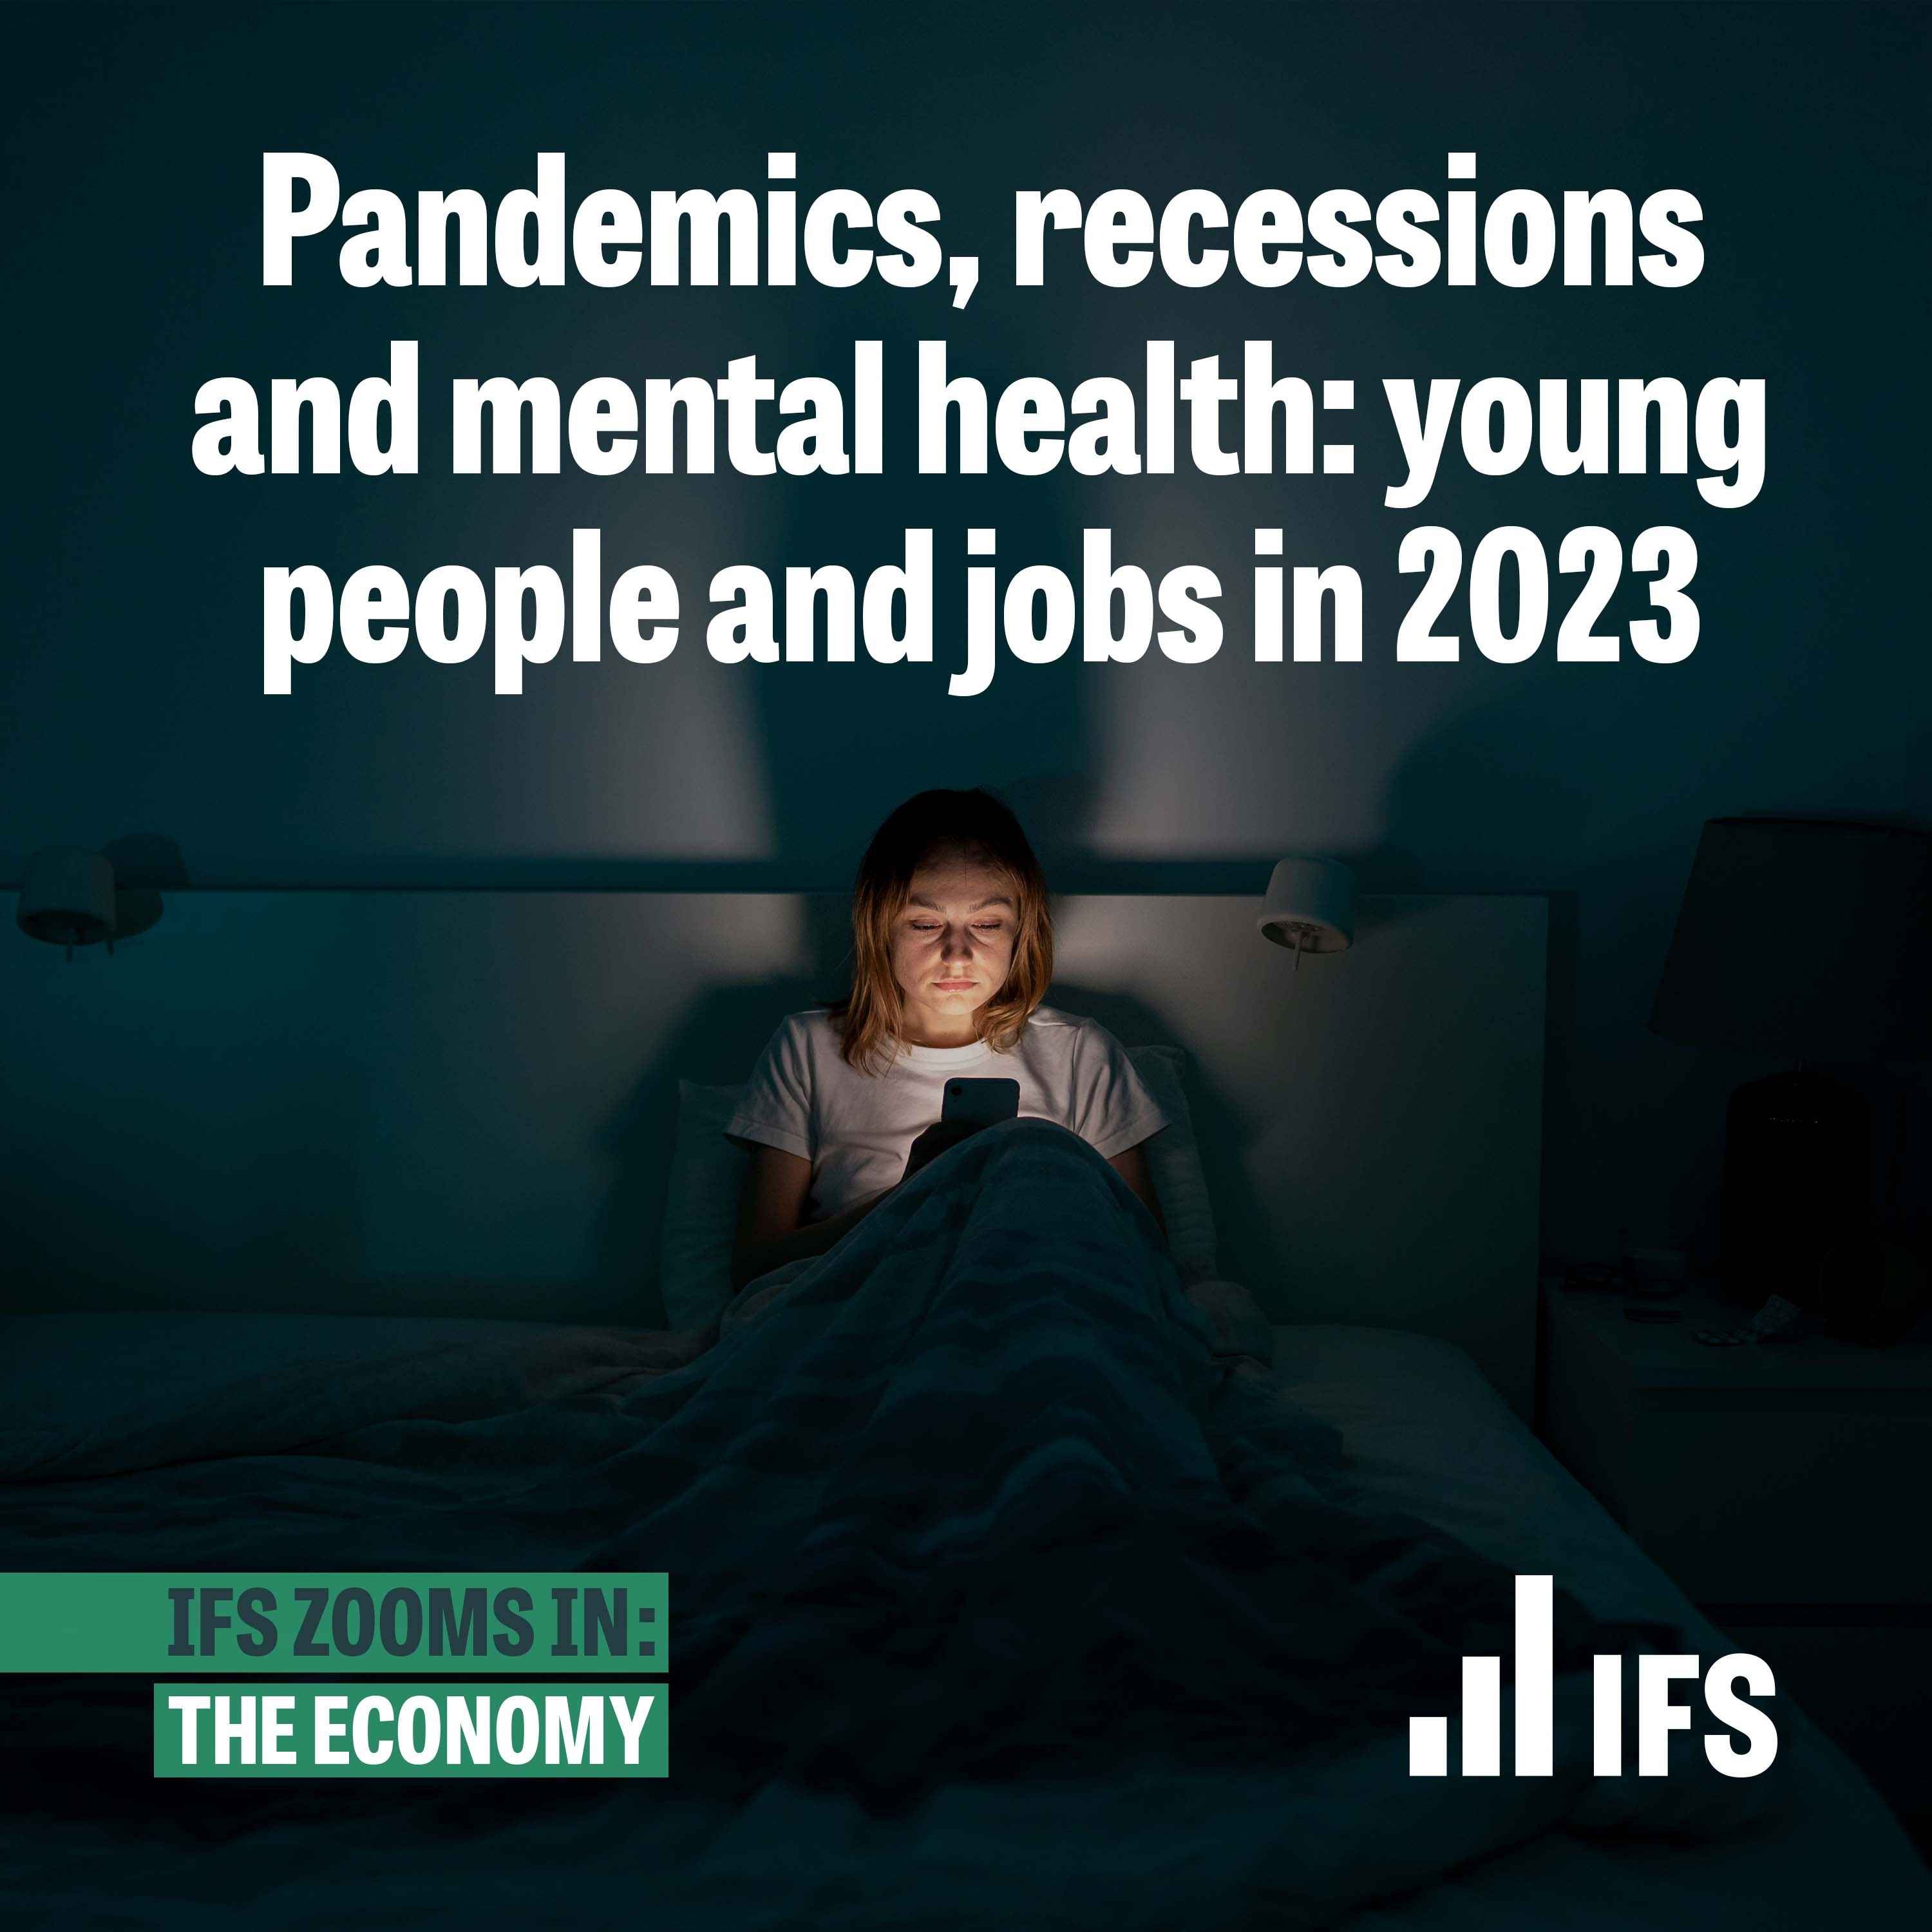 Pandemics, recessions and mental health: young people and jobs in 2023